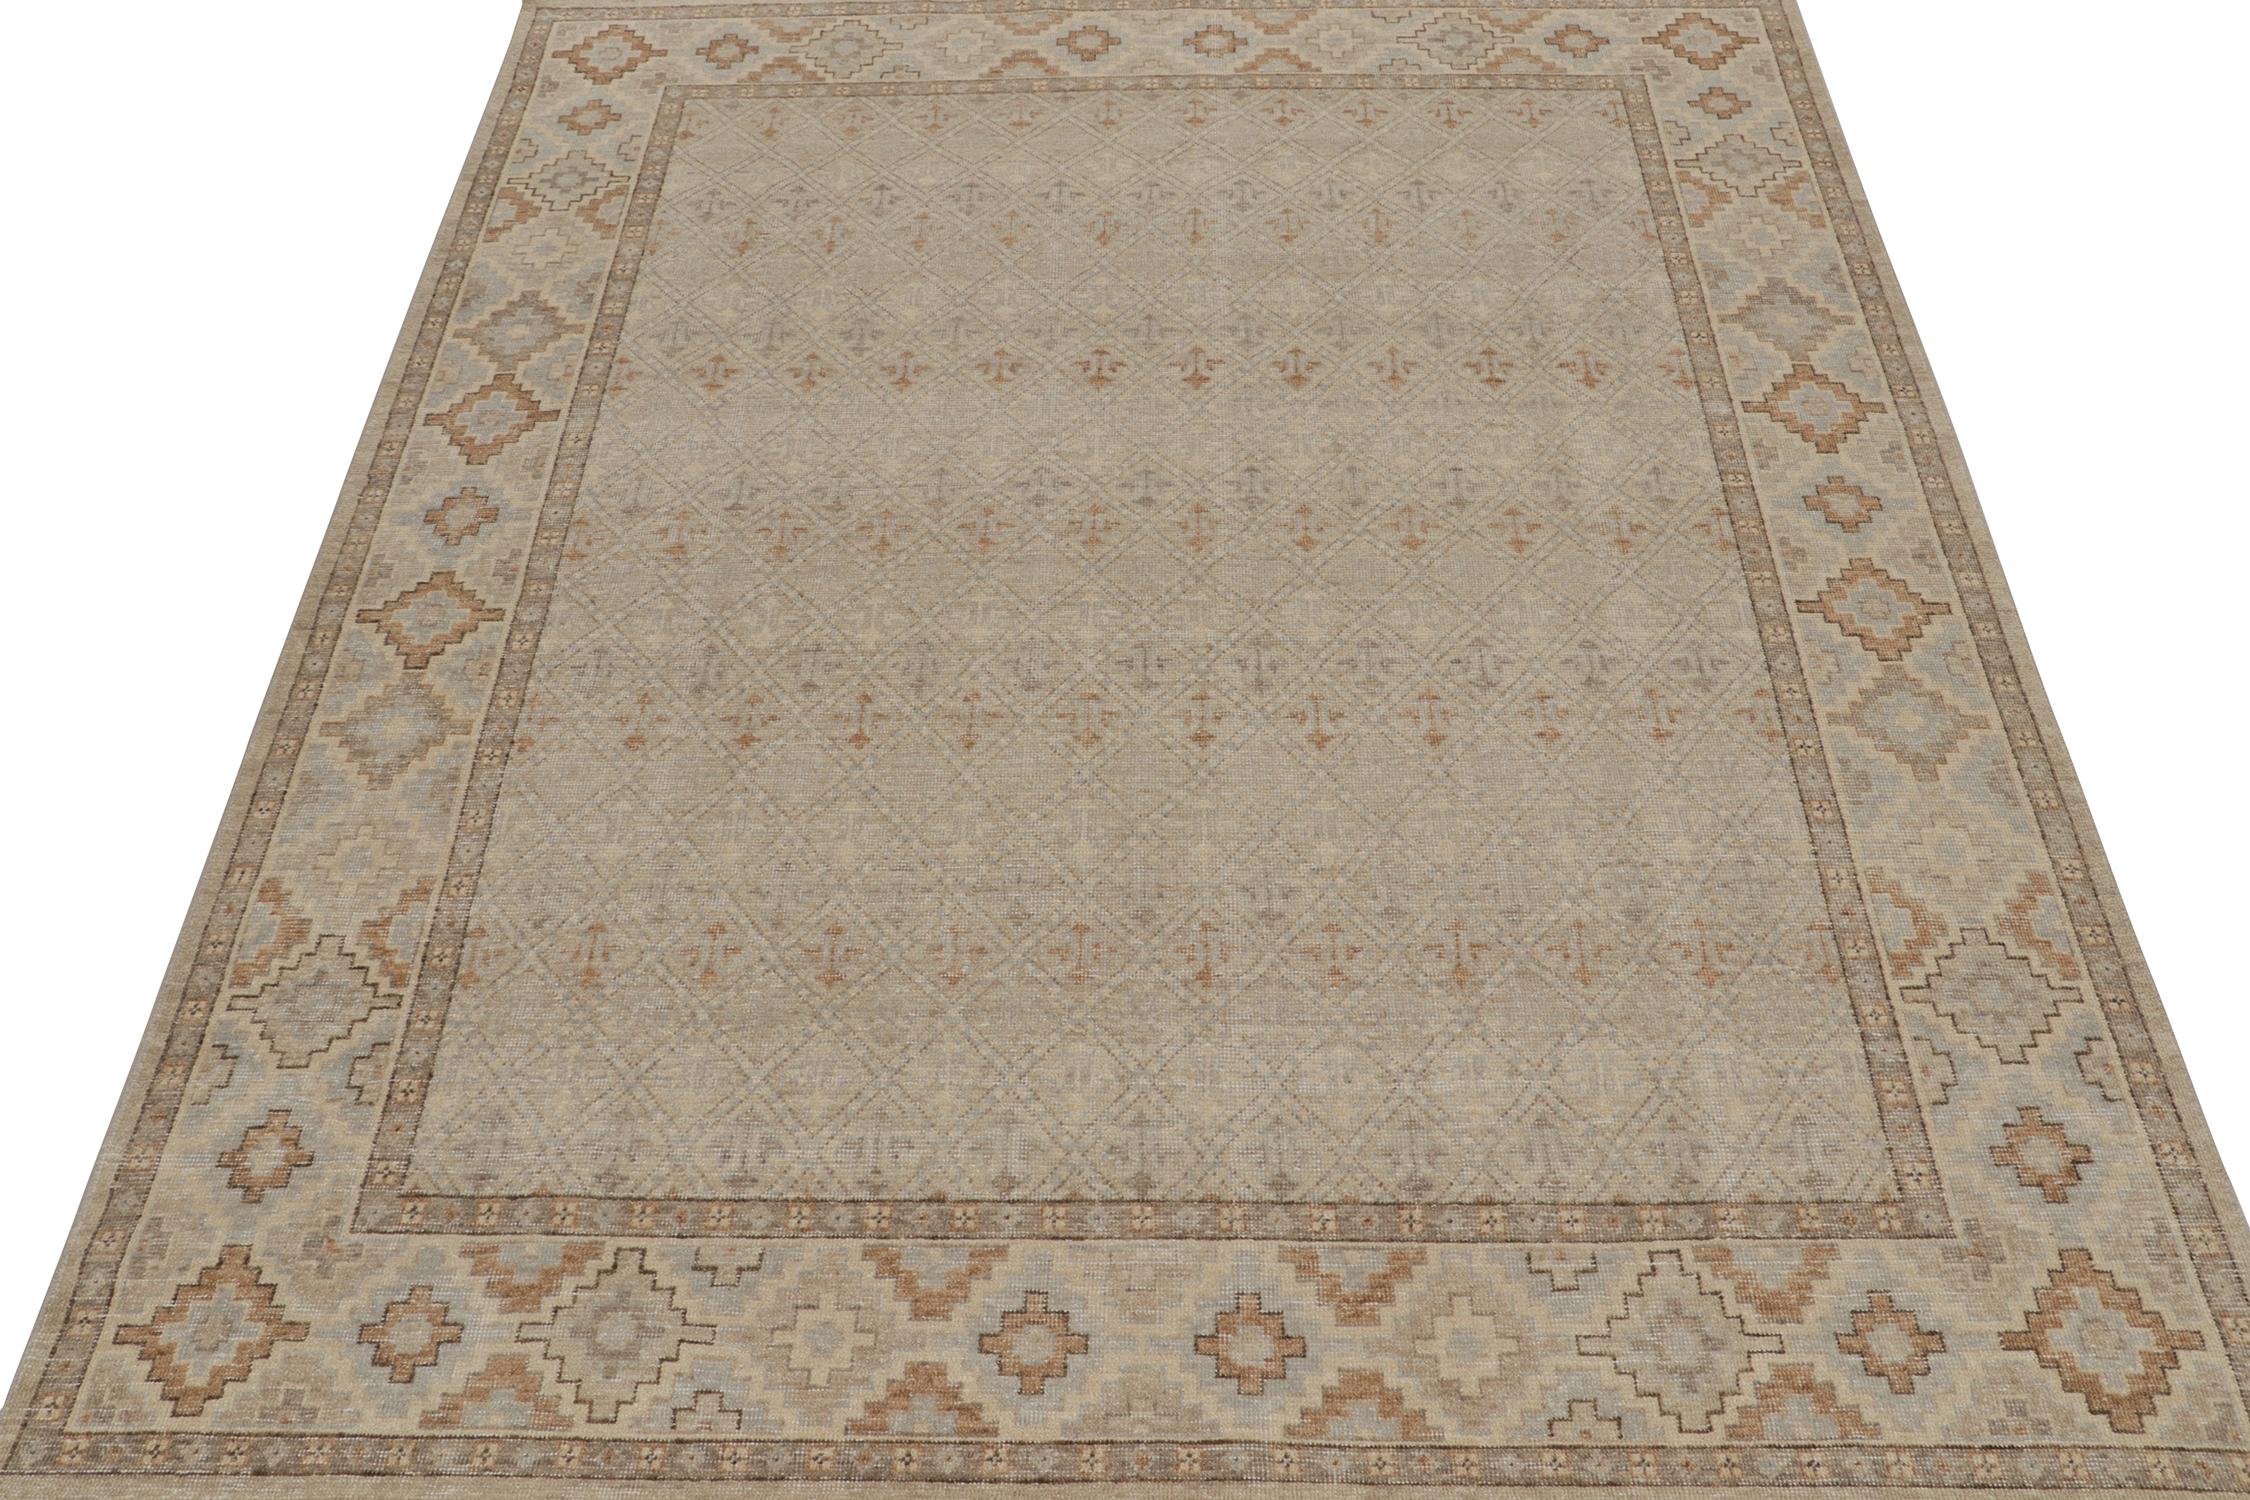 ??This 8x10 rug is a new addition to the Homage Collection by Rug & Kilim.

Further On the Design: 

Hand knotted in wool and cotton, this piece enjoys an elaborate geometric pattern in forgiving beige, gray, and blue. Keen eyes will admire a